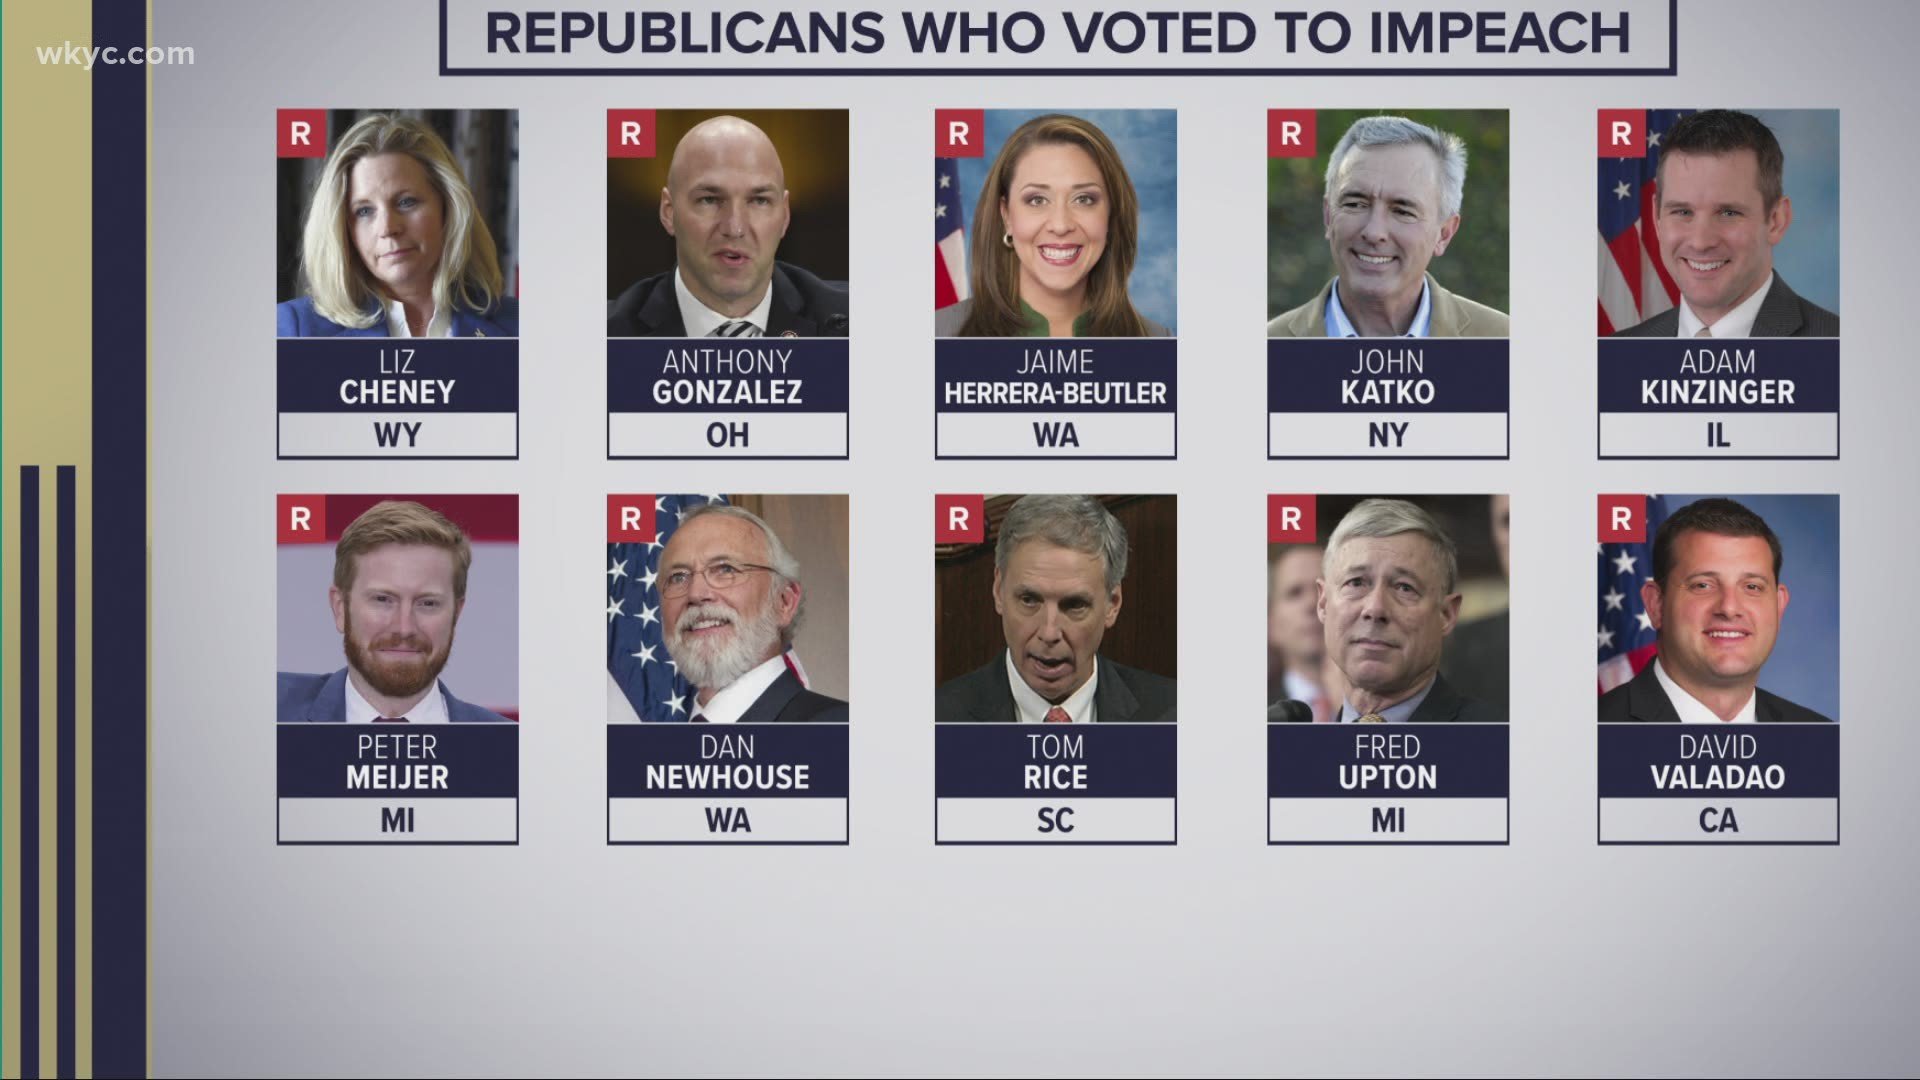 Ohio Rep. Anthony Gonzalez among 10 Republicans who voted ...